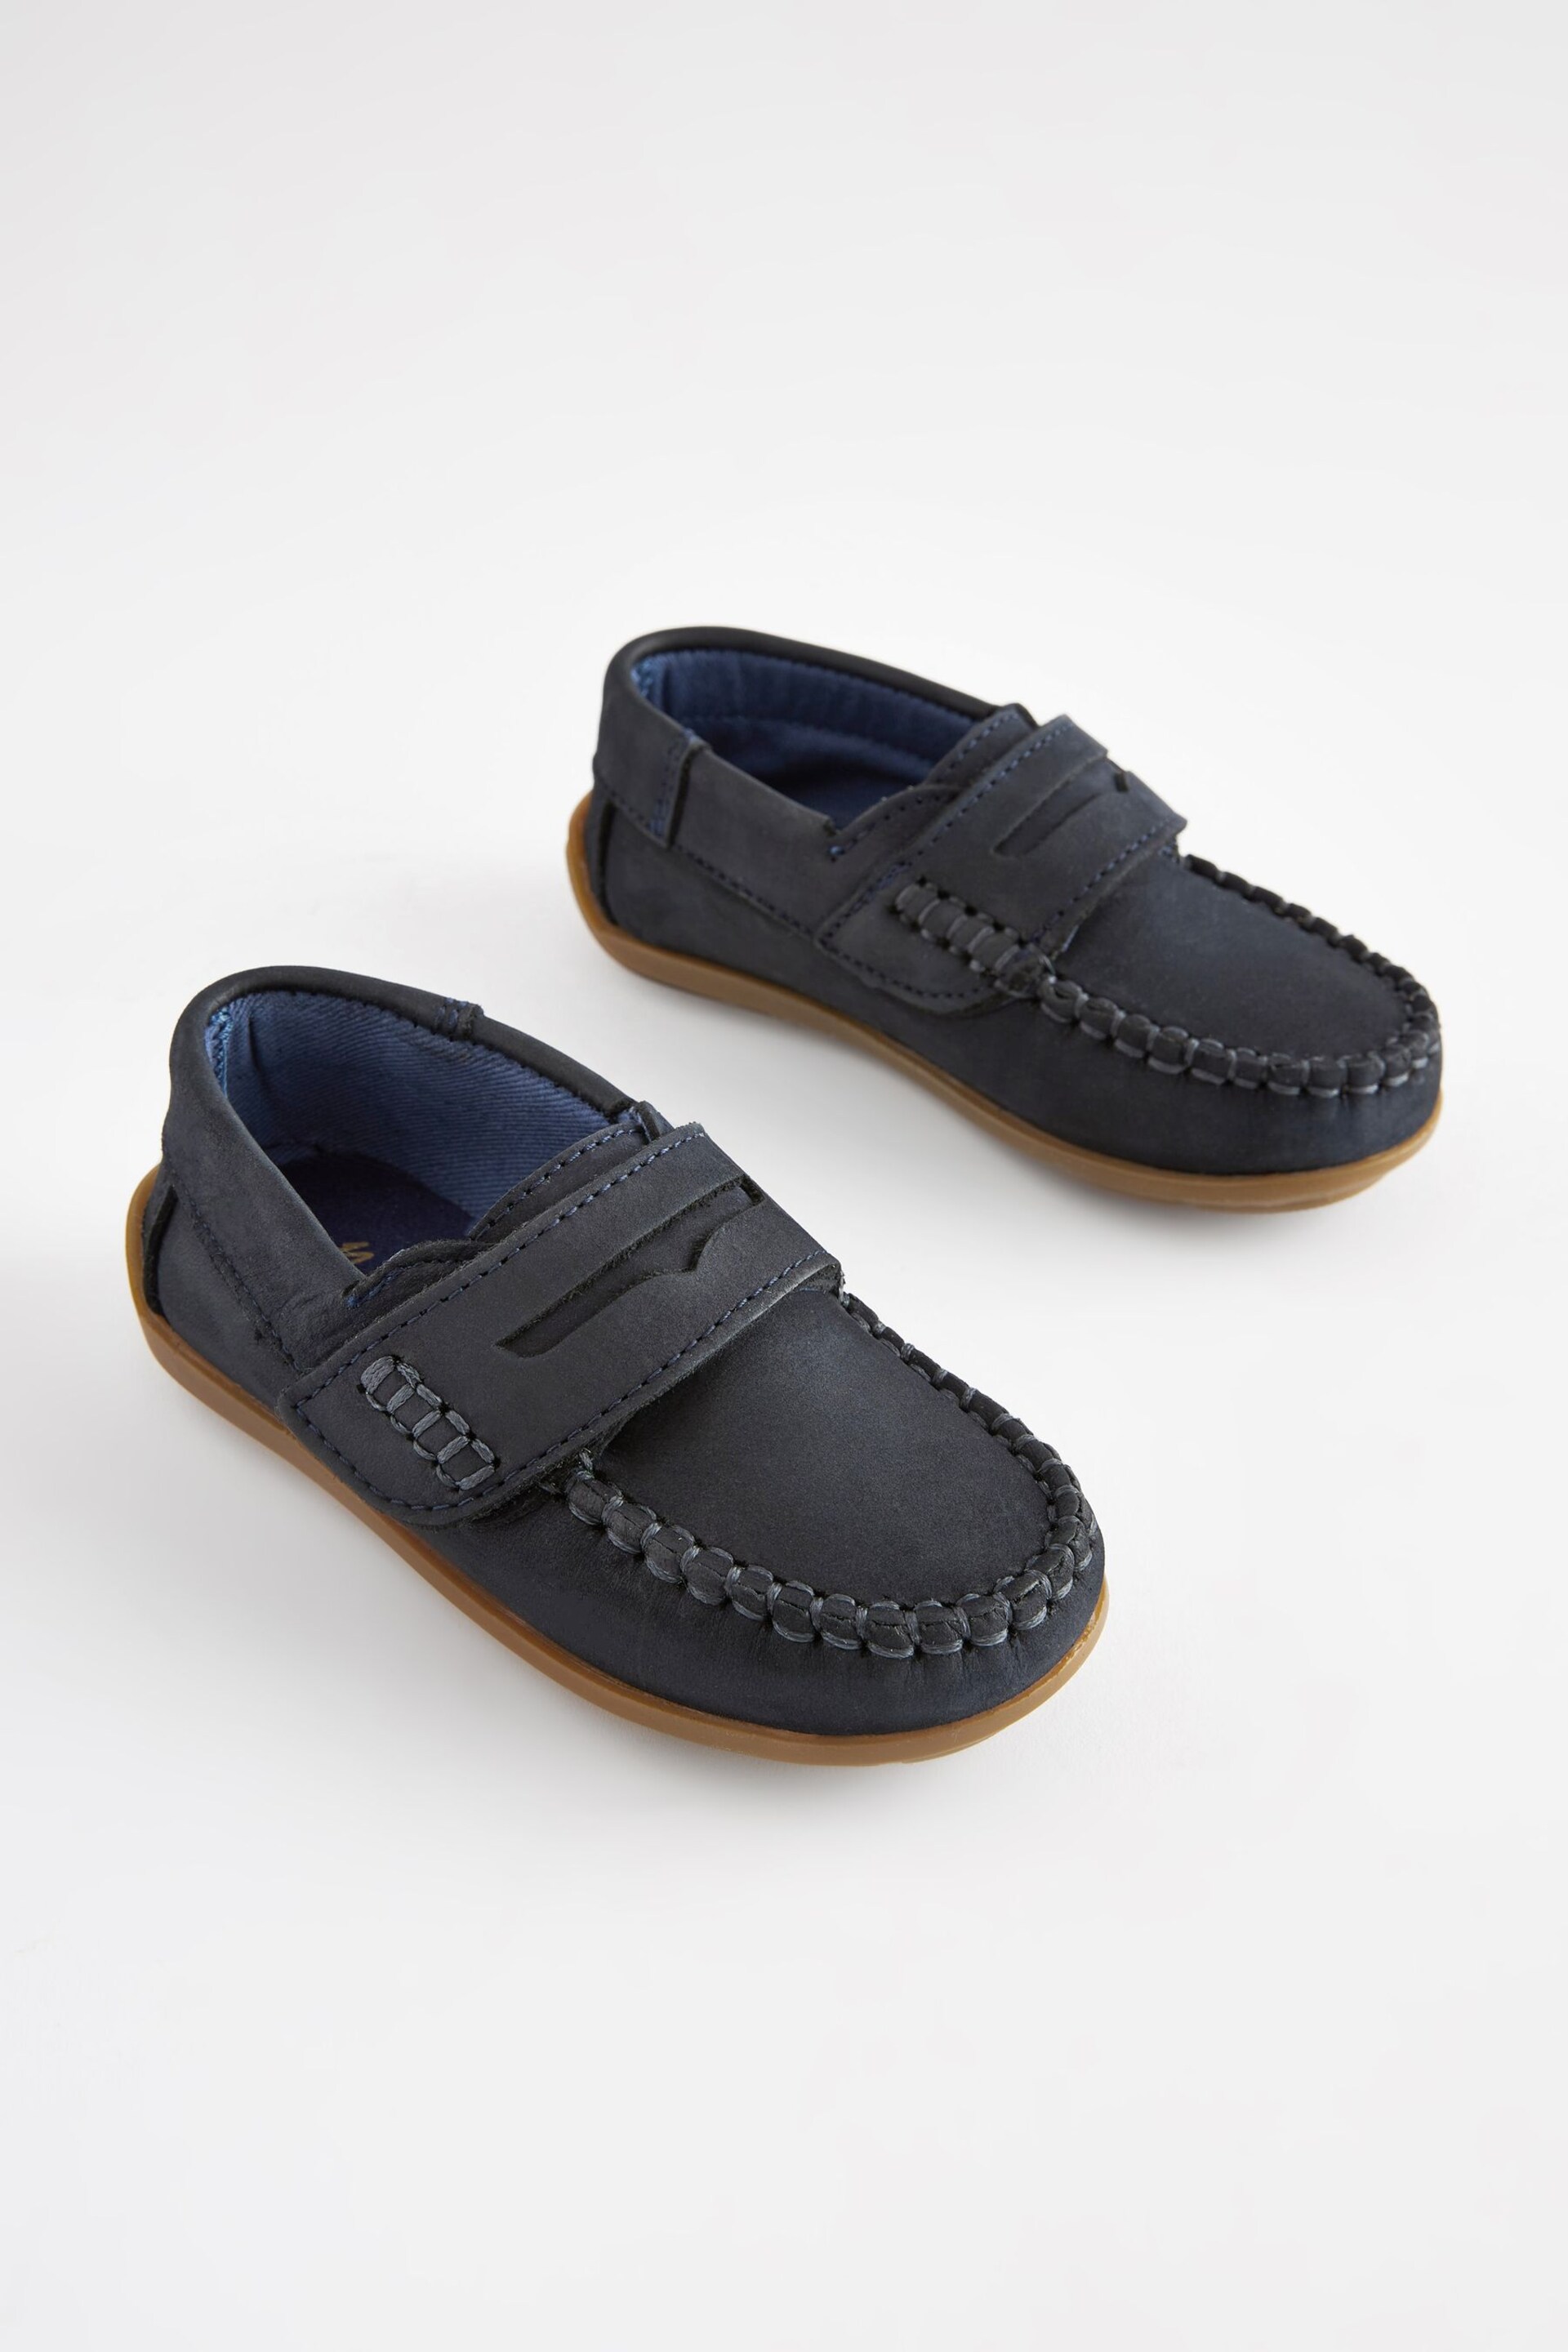 Navy Wide Fit (G) Leather Penny Loafers with Touch and Close Fastening - Image 1 of 7